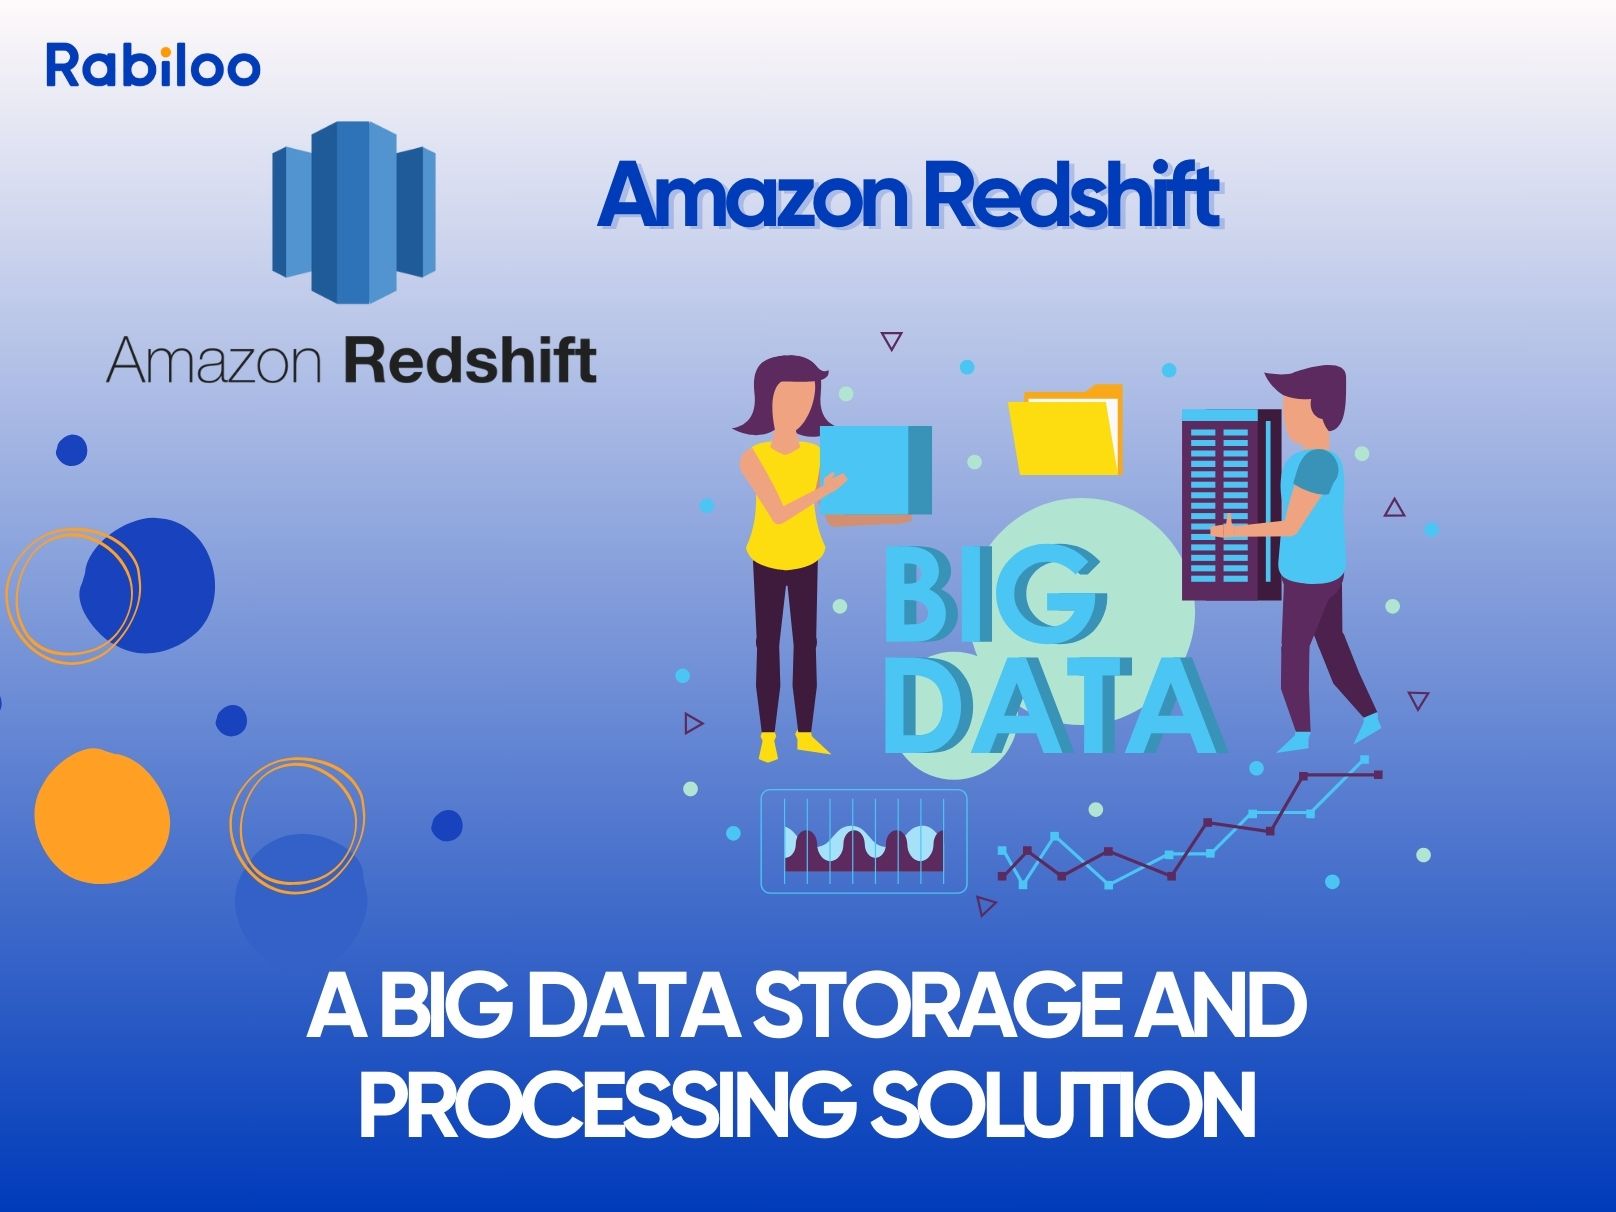 Amazon Redshift - A Big Data Storage and Processing Solution